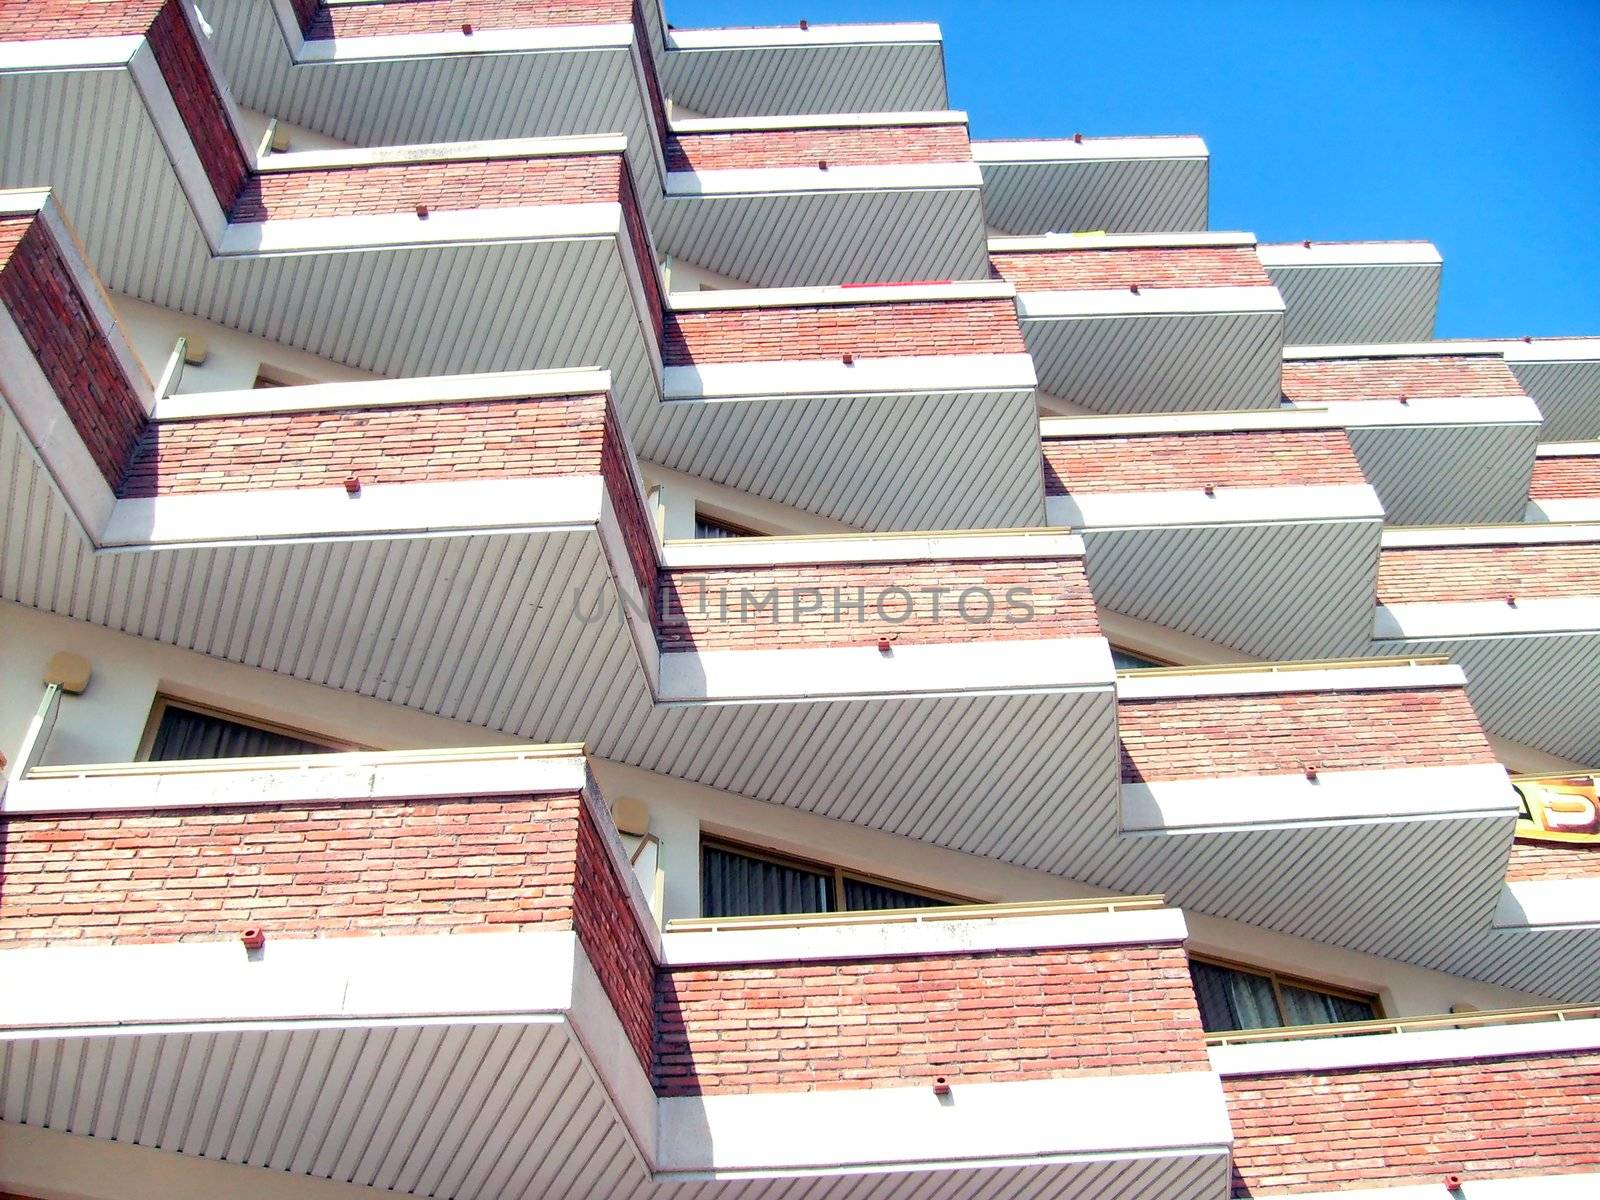 General view of exterior of lbalconies on Spanish tourist hotel.